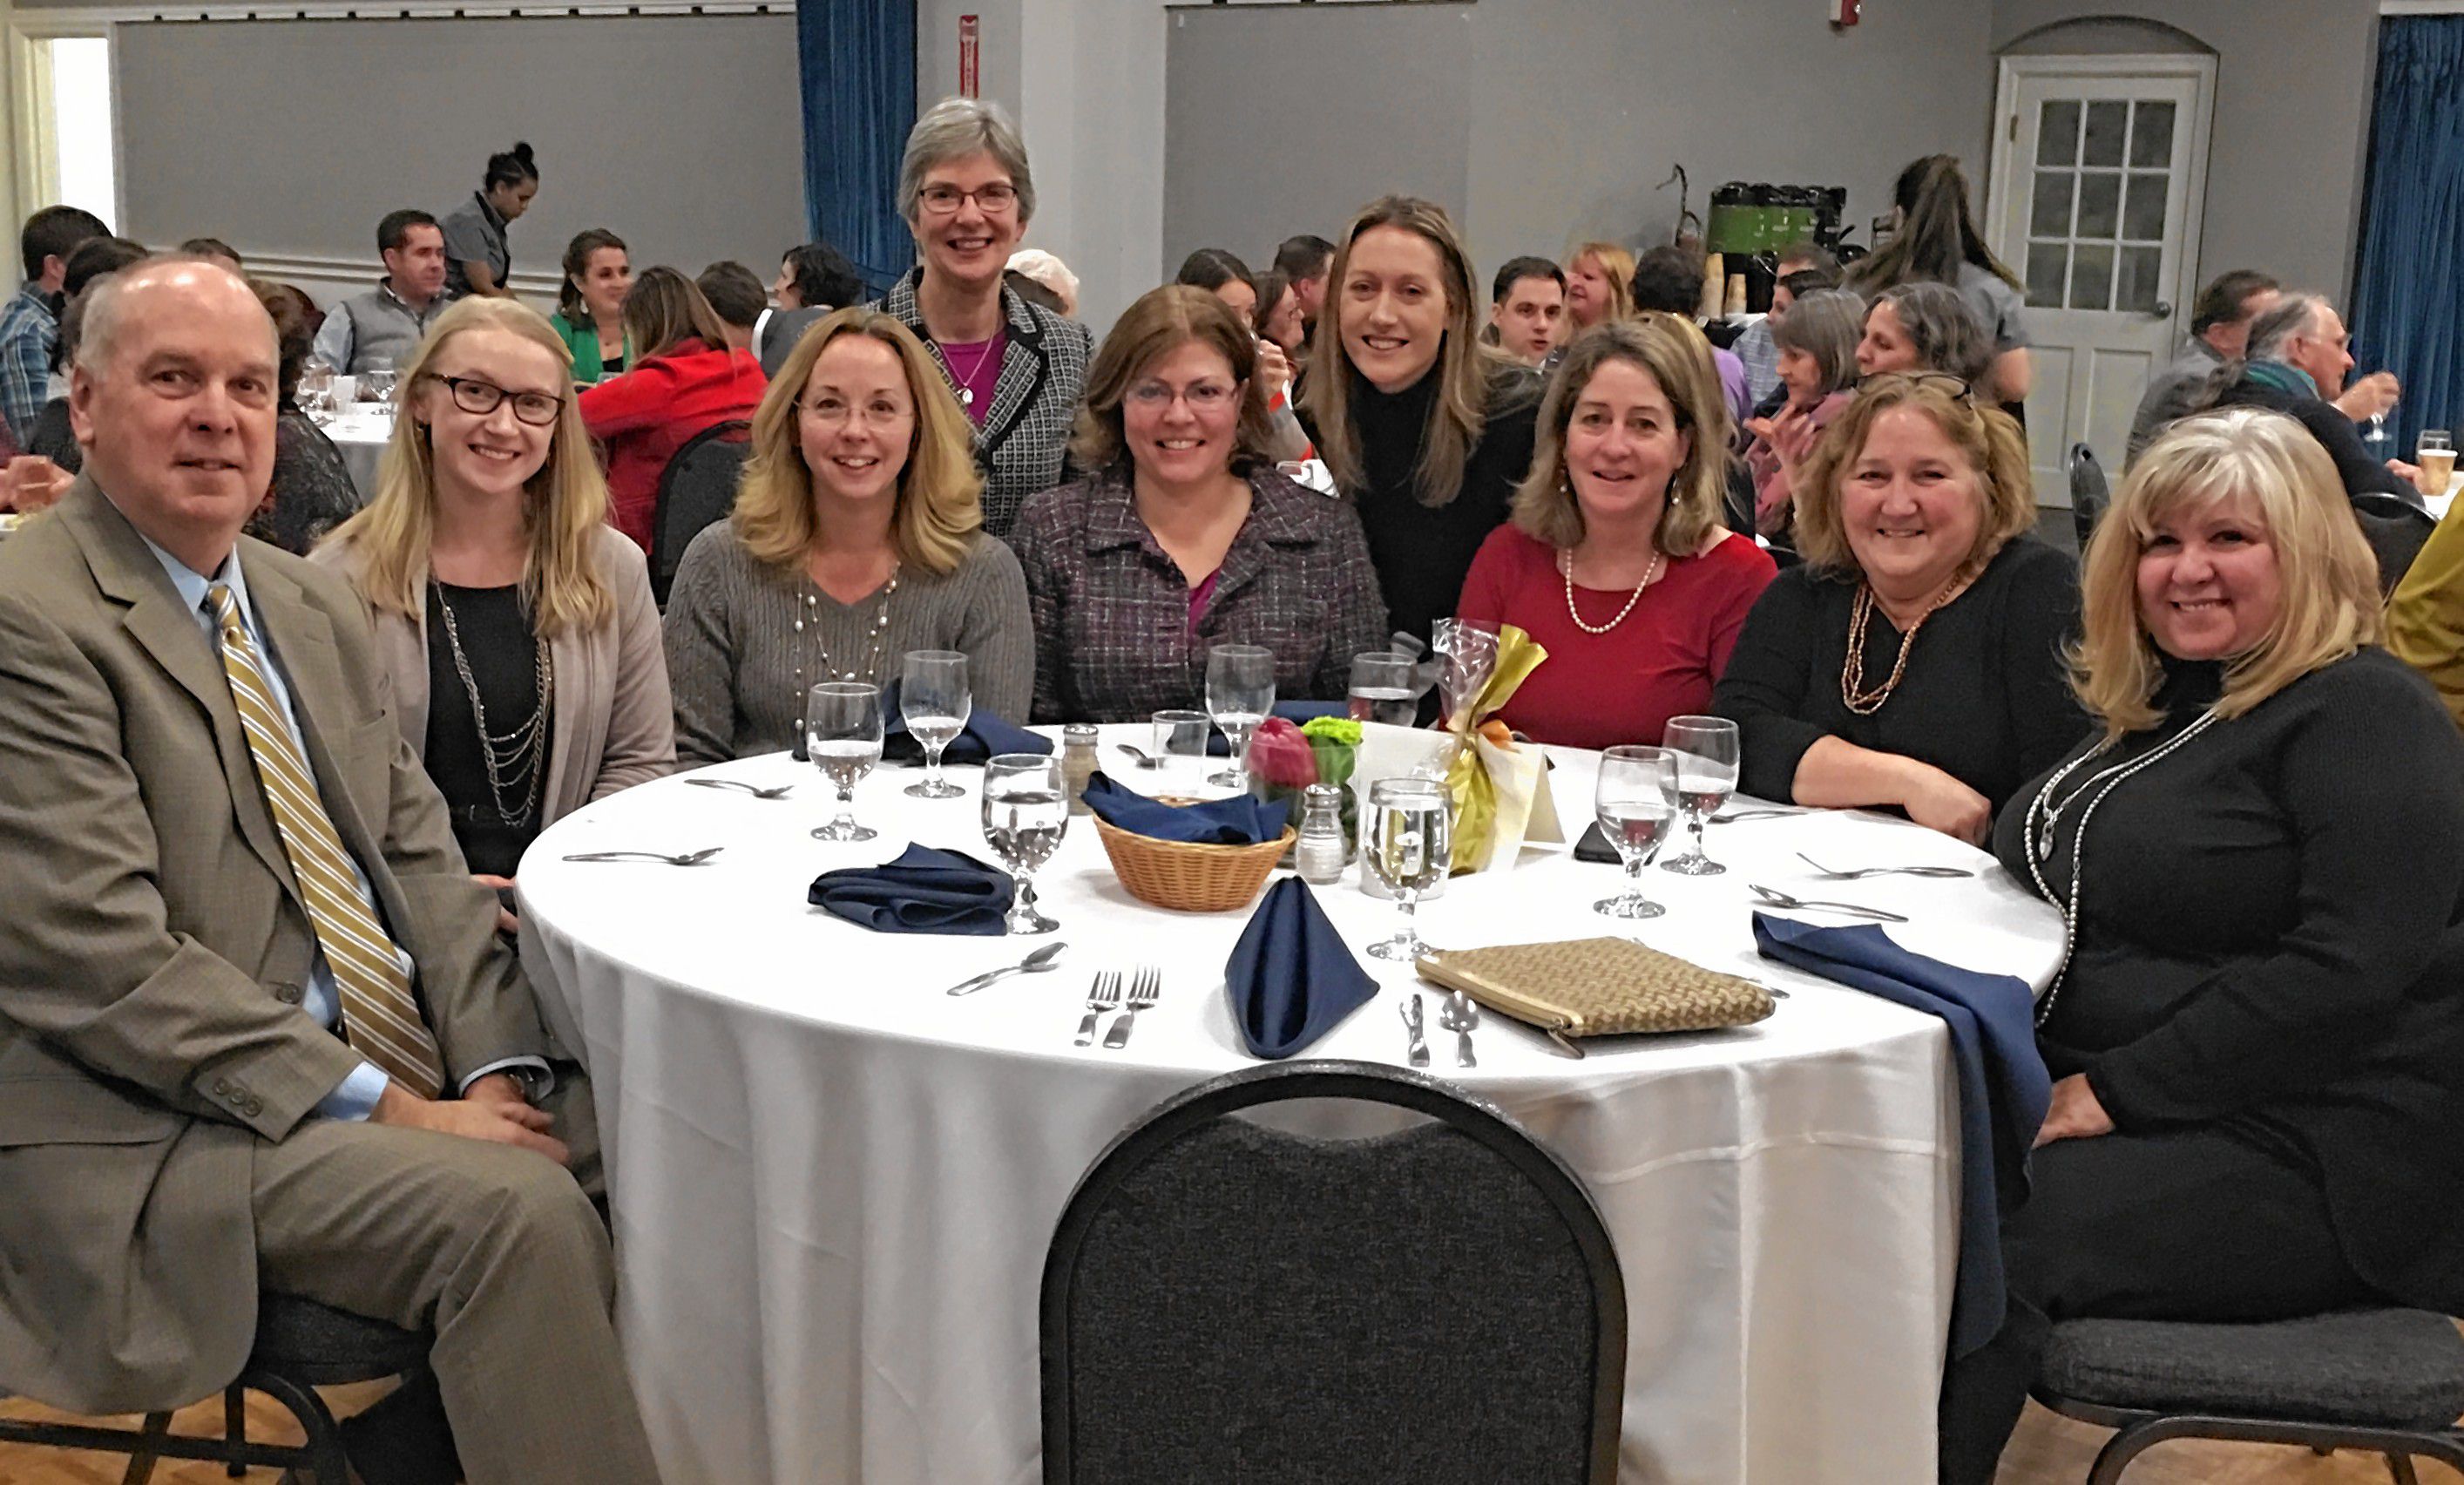 Lake Sunapee Bank was named Business of the Year at the Lake Sunapee Region Chamber of Commerce’s recent annual meeting. Pictured, from left, are Bill McIver, Kaitlyn Covel, Cathy Murray, Deb Johnson, Marie Pelletier, Meghan Wilkie, Jayne Rayno, Roxanne Shedd and Tammy Heiser. (Courtesy photograph)